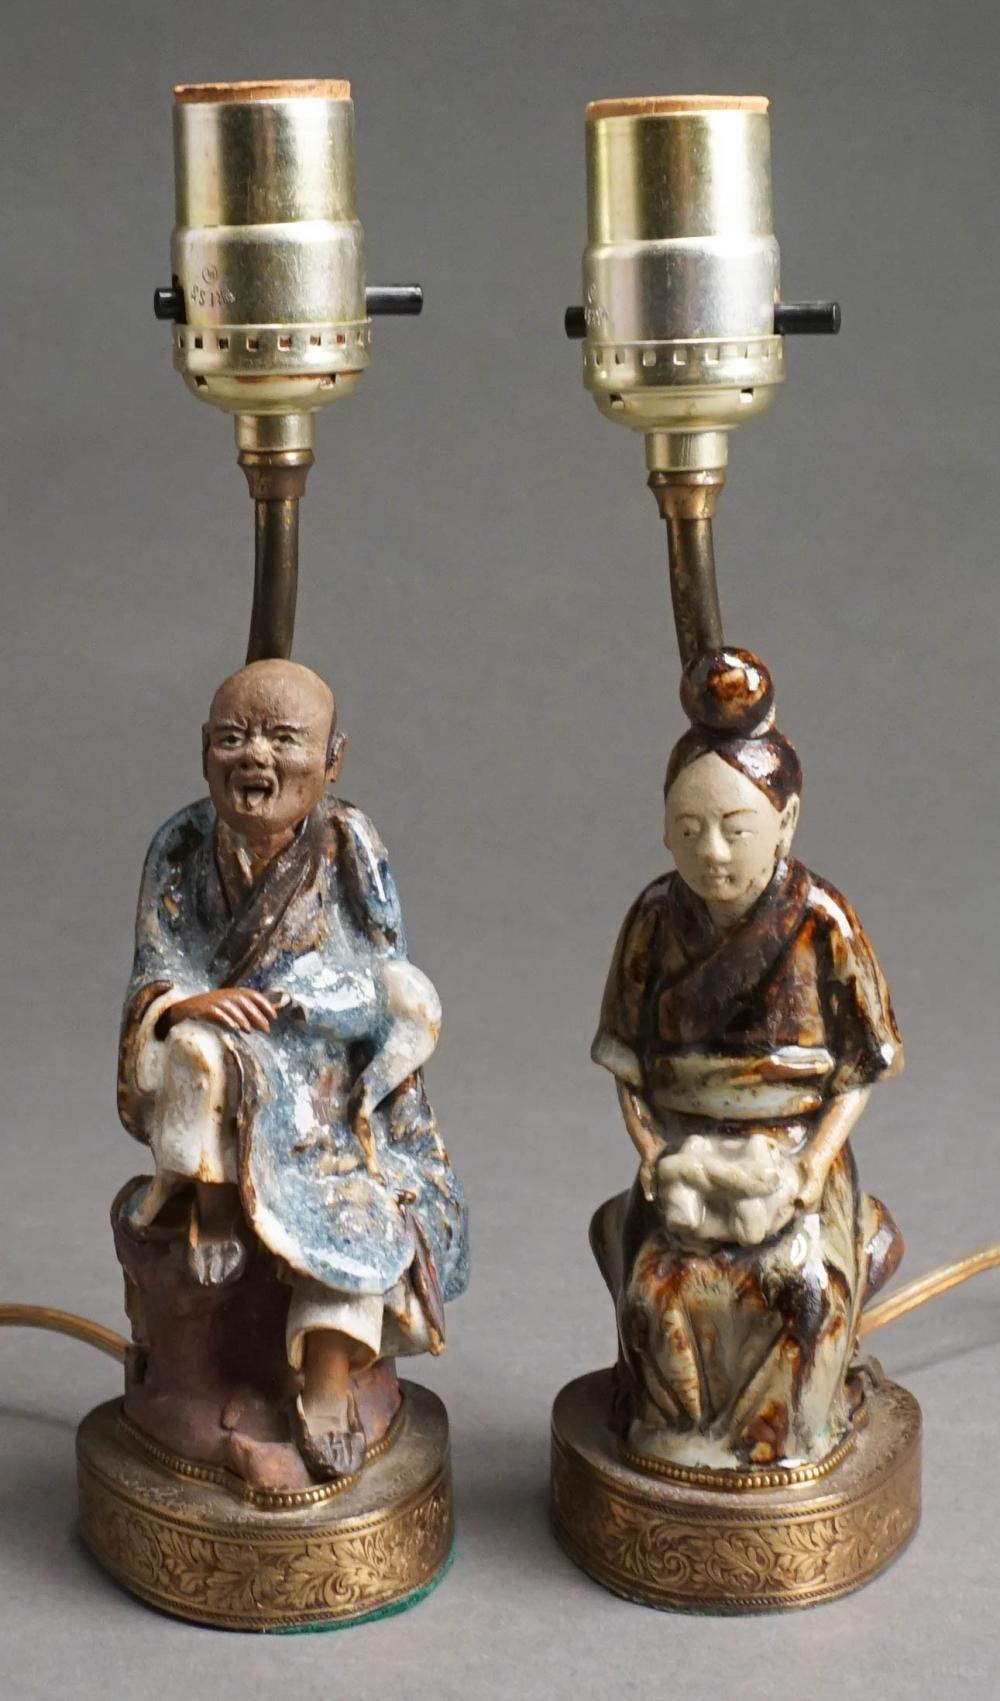 PAIR OF CHINESE MUD FIGURES MOUNTED